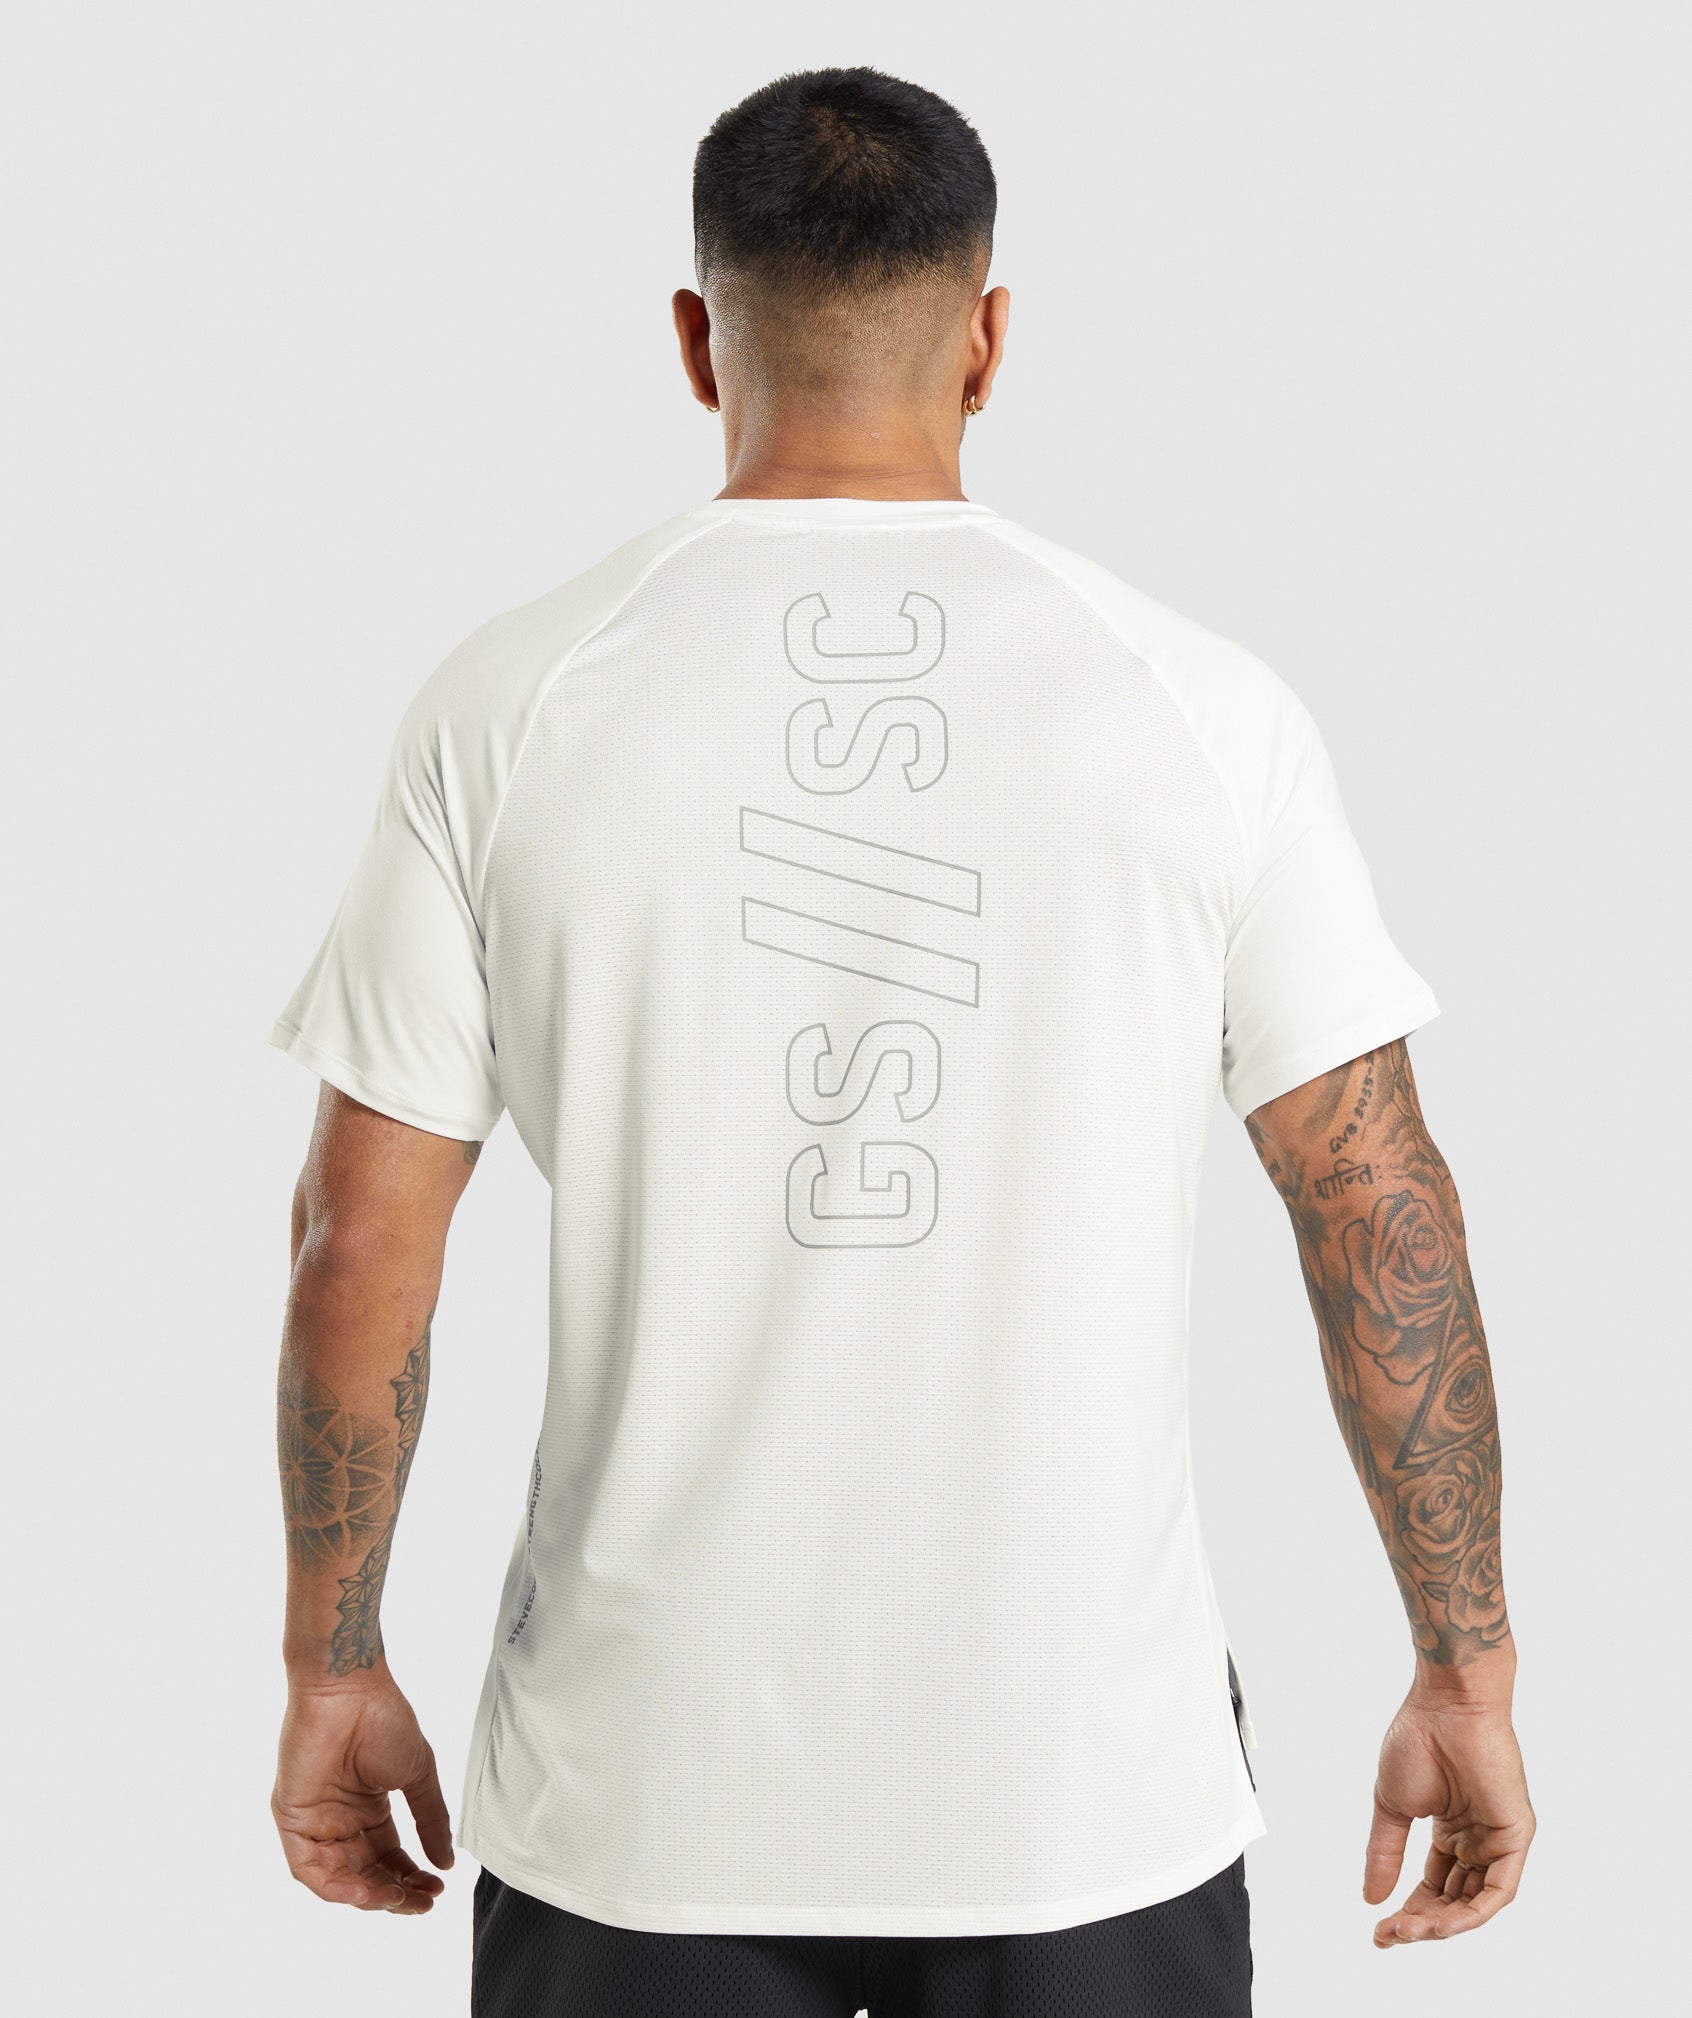 Gymshark//Steve Cook T-Shirt in Off White - view 2